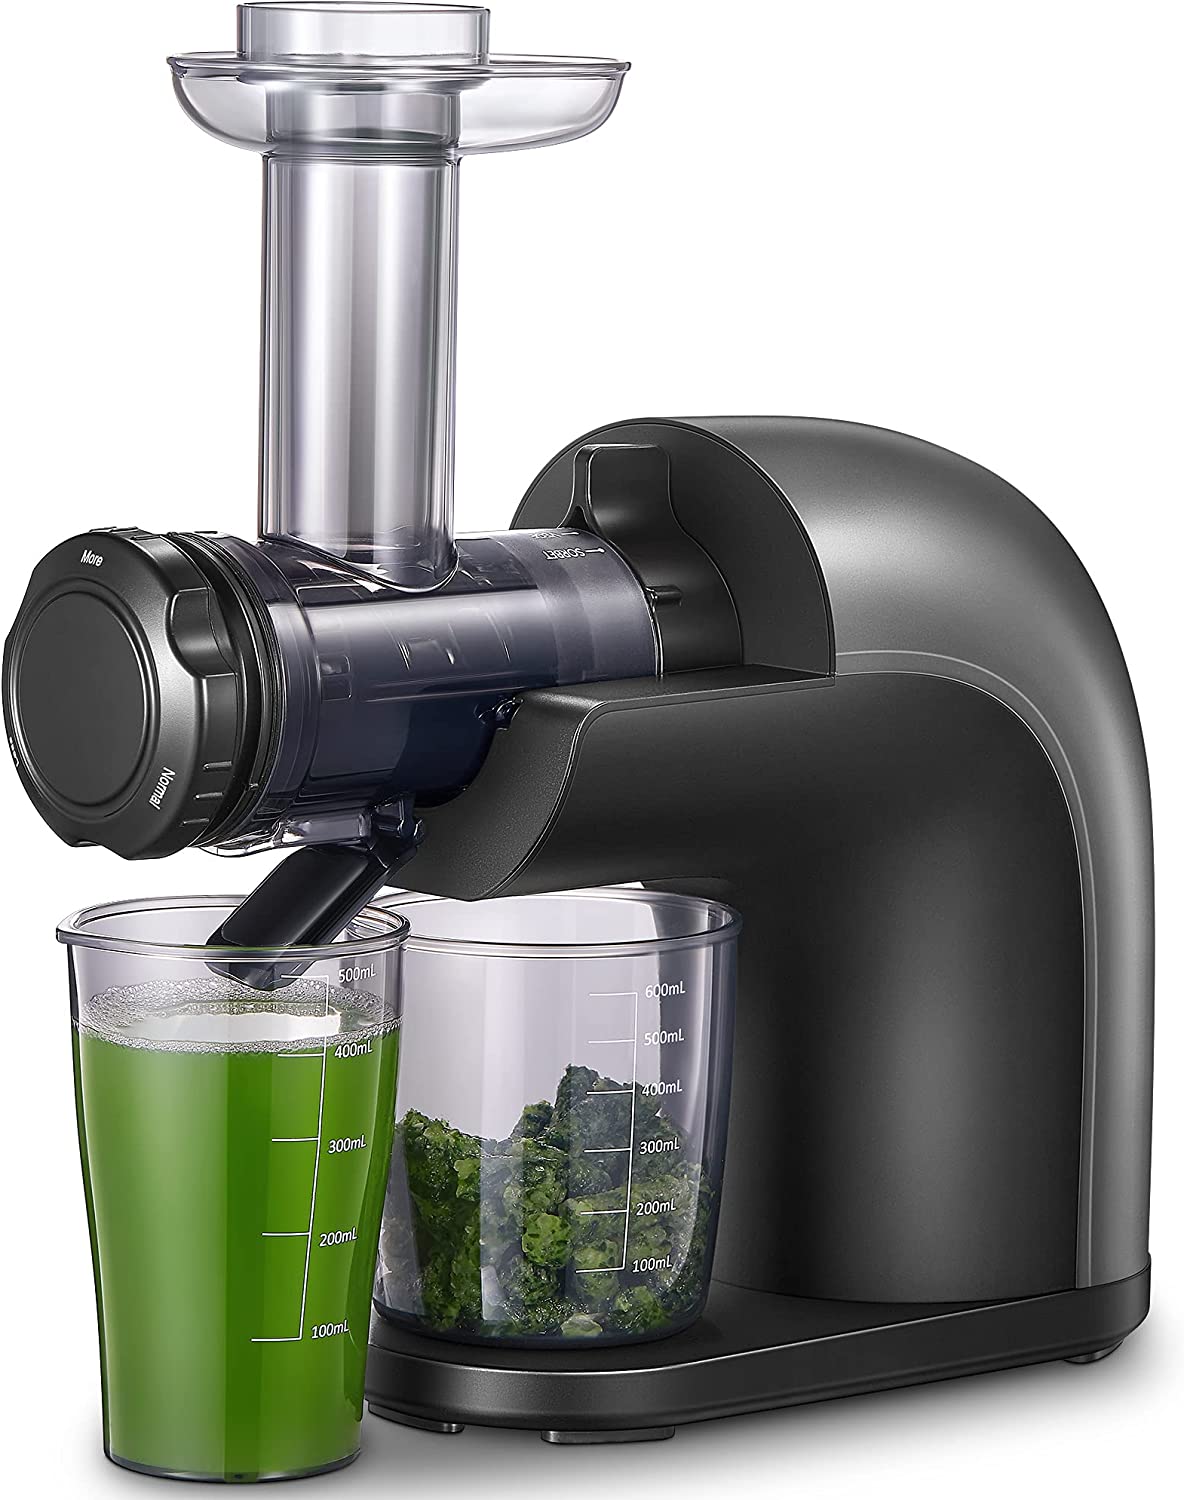 Juicer Machine, AICOOK Slow Masticating Extractor without Metal Filters, Easy to Clean, 3 Mode Adjustment Extrusion&Juice Pulp Controllable, Anti-Drip, Ice Cream&Recipes for Vegetables and Fruits